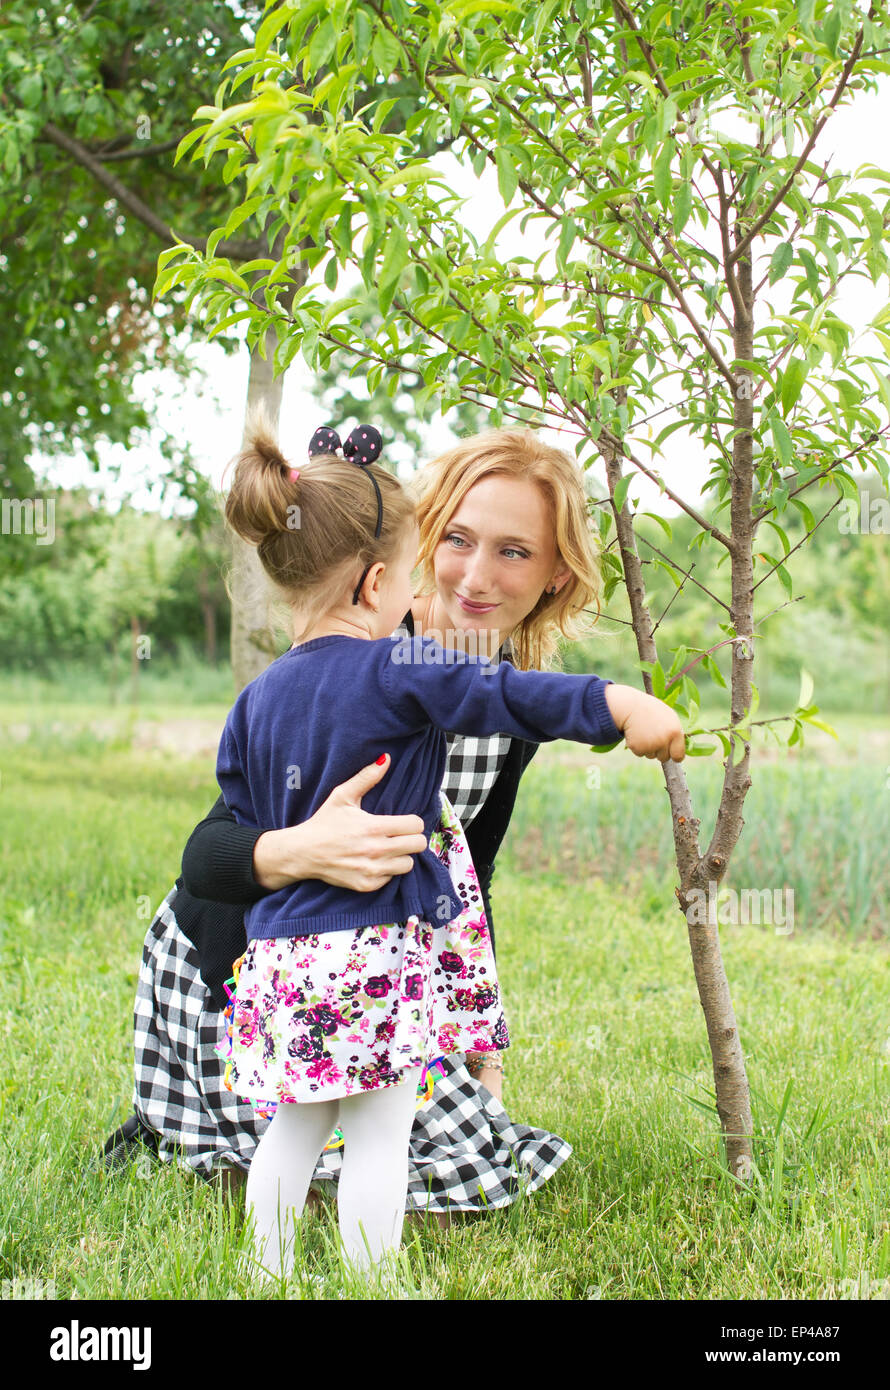 Countryside family happiness Stock Photo